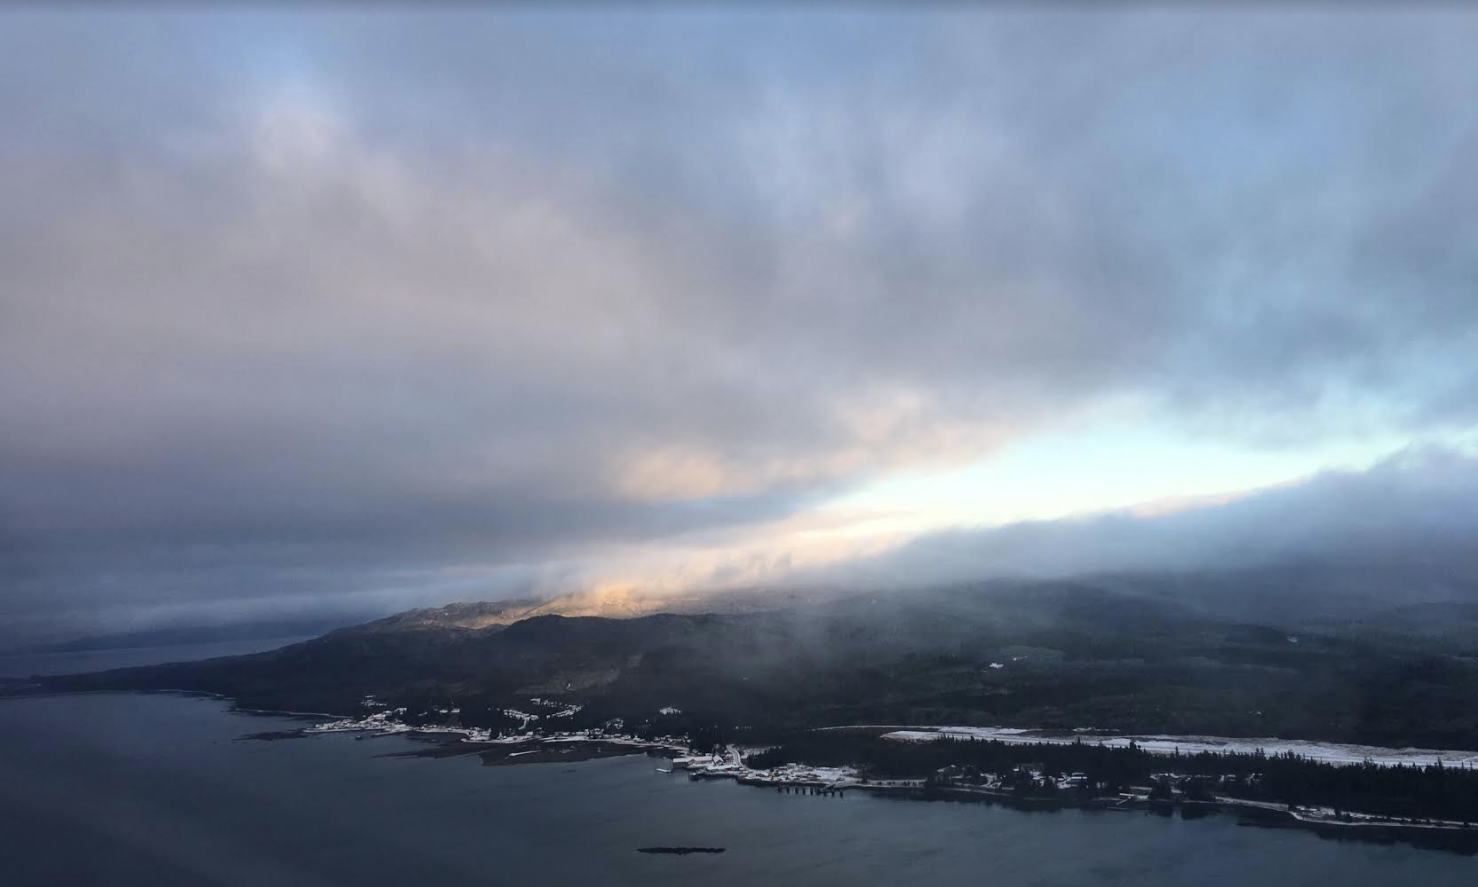 A view of Kake from the seaplane. Image by Brooke Stephenson. United States, 2019.